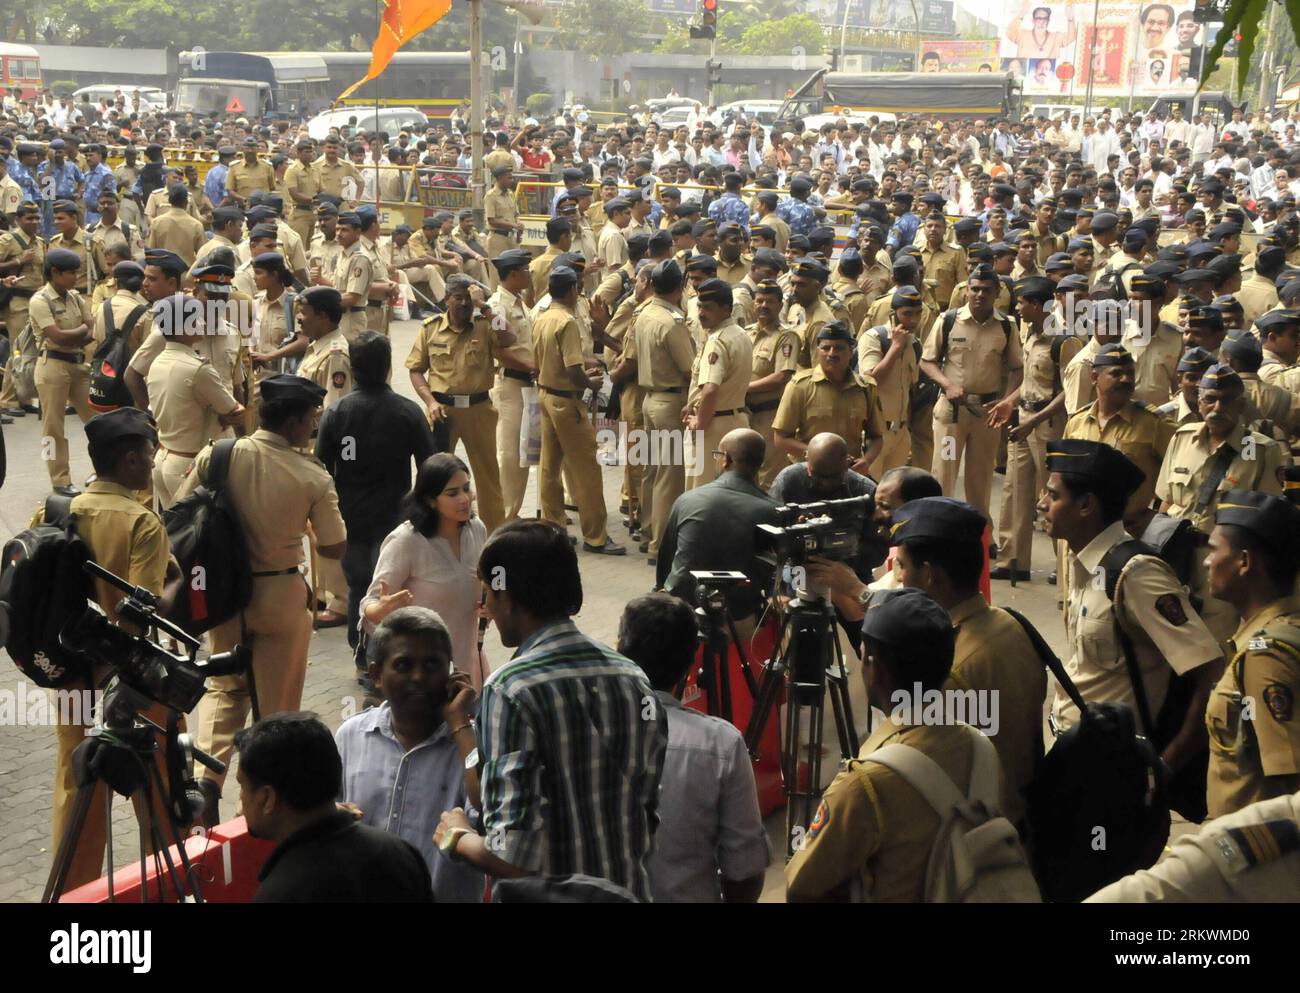 Bildnummer: 58709598  Datum: 15.11.2012  Copyright: imago/Xinhua Policemen maintain the order near Bal Thackeray s residence in Mumbai, India, on Nov. 15, 2012. India s Hindu extremist leader BalxThackeray was confirm to be in critical condition by his family Thursday. Large crowd of supporters gathered outside the residence of BalxThackeray, 86-year-old founder of the Shiv Sena Party, in Mumbai. The secuity was leveled up and many stores shut down temporarily in case of any unrest. (Xinhua/Wang Ping) (srb) INDIA-MUMBAI-POLITICS-HEALTHxTHACKERAY PUBLICATIONxNOTxINxCHN Gesellschaft Politik Poli Stock Photo